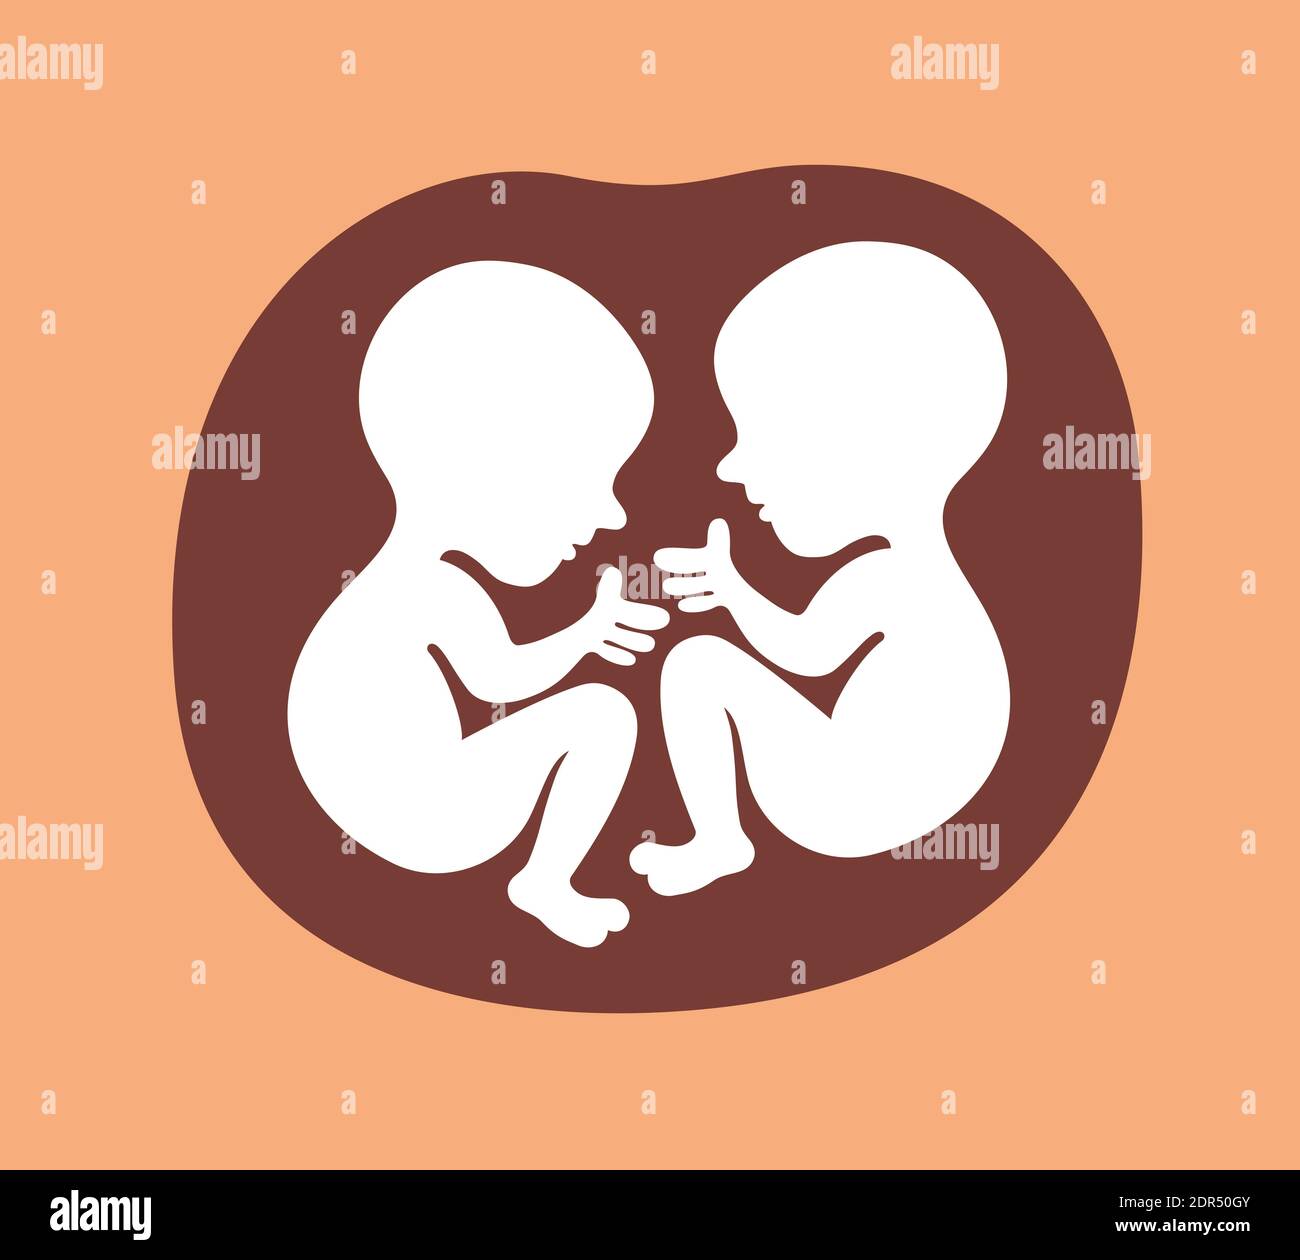 Twins - two unborn babies are in uterus of mother. Prenatal development of fetus and foetus. Vector illustration. Stock Photo